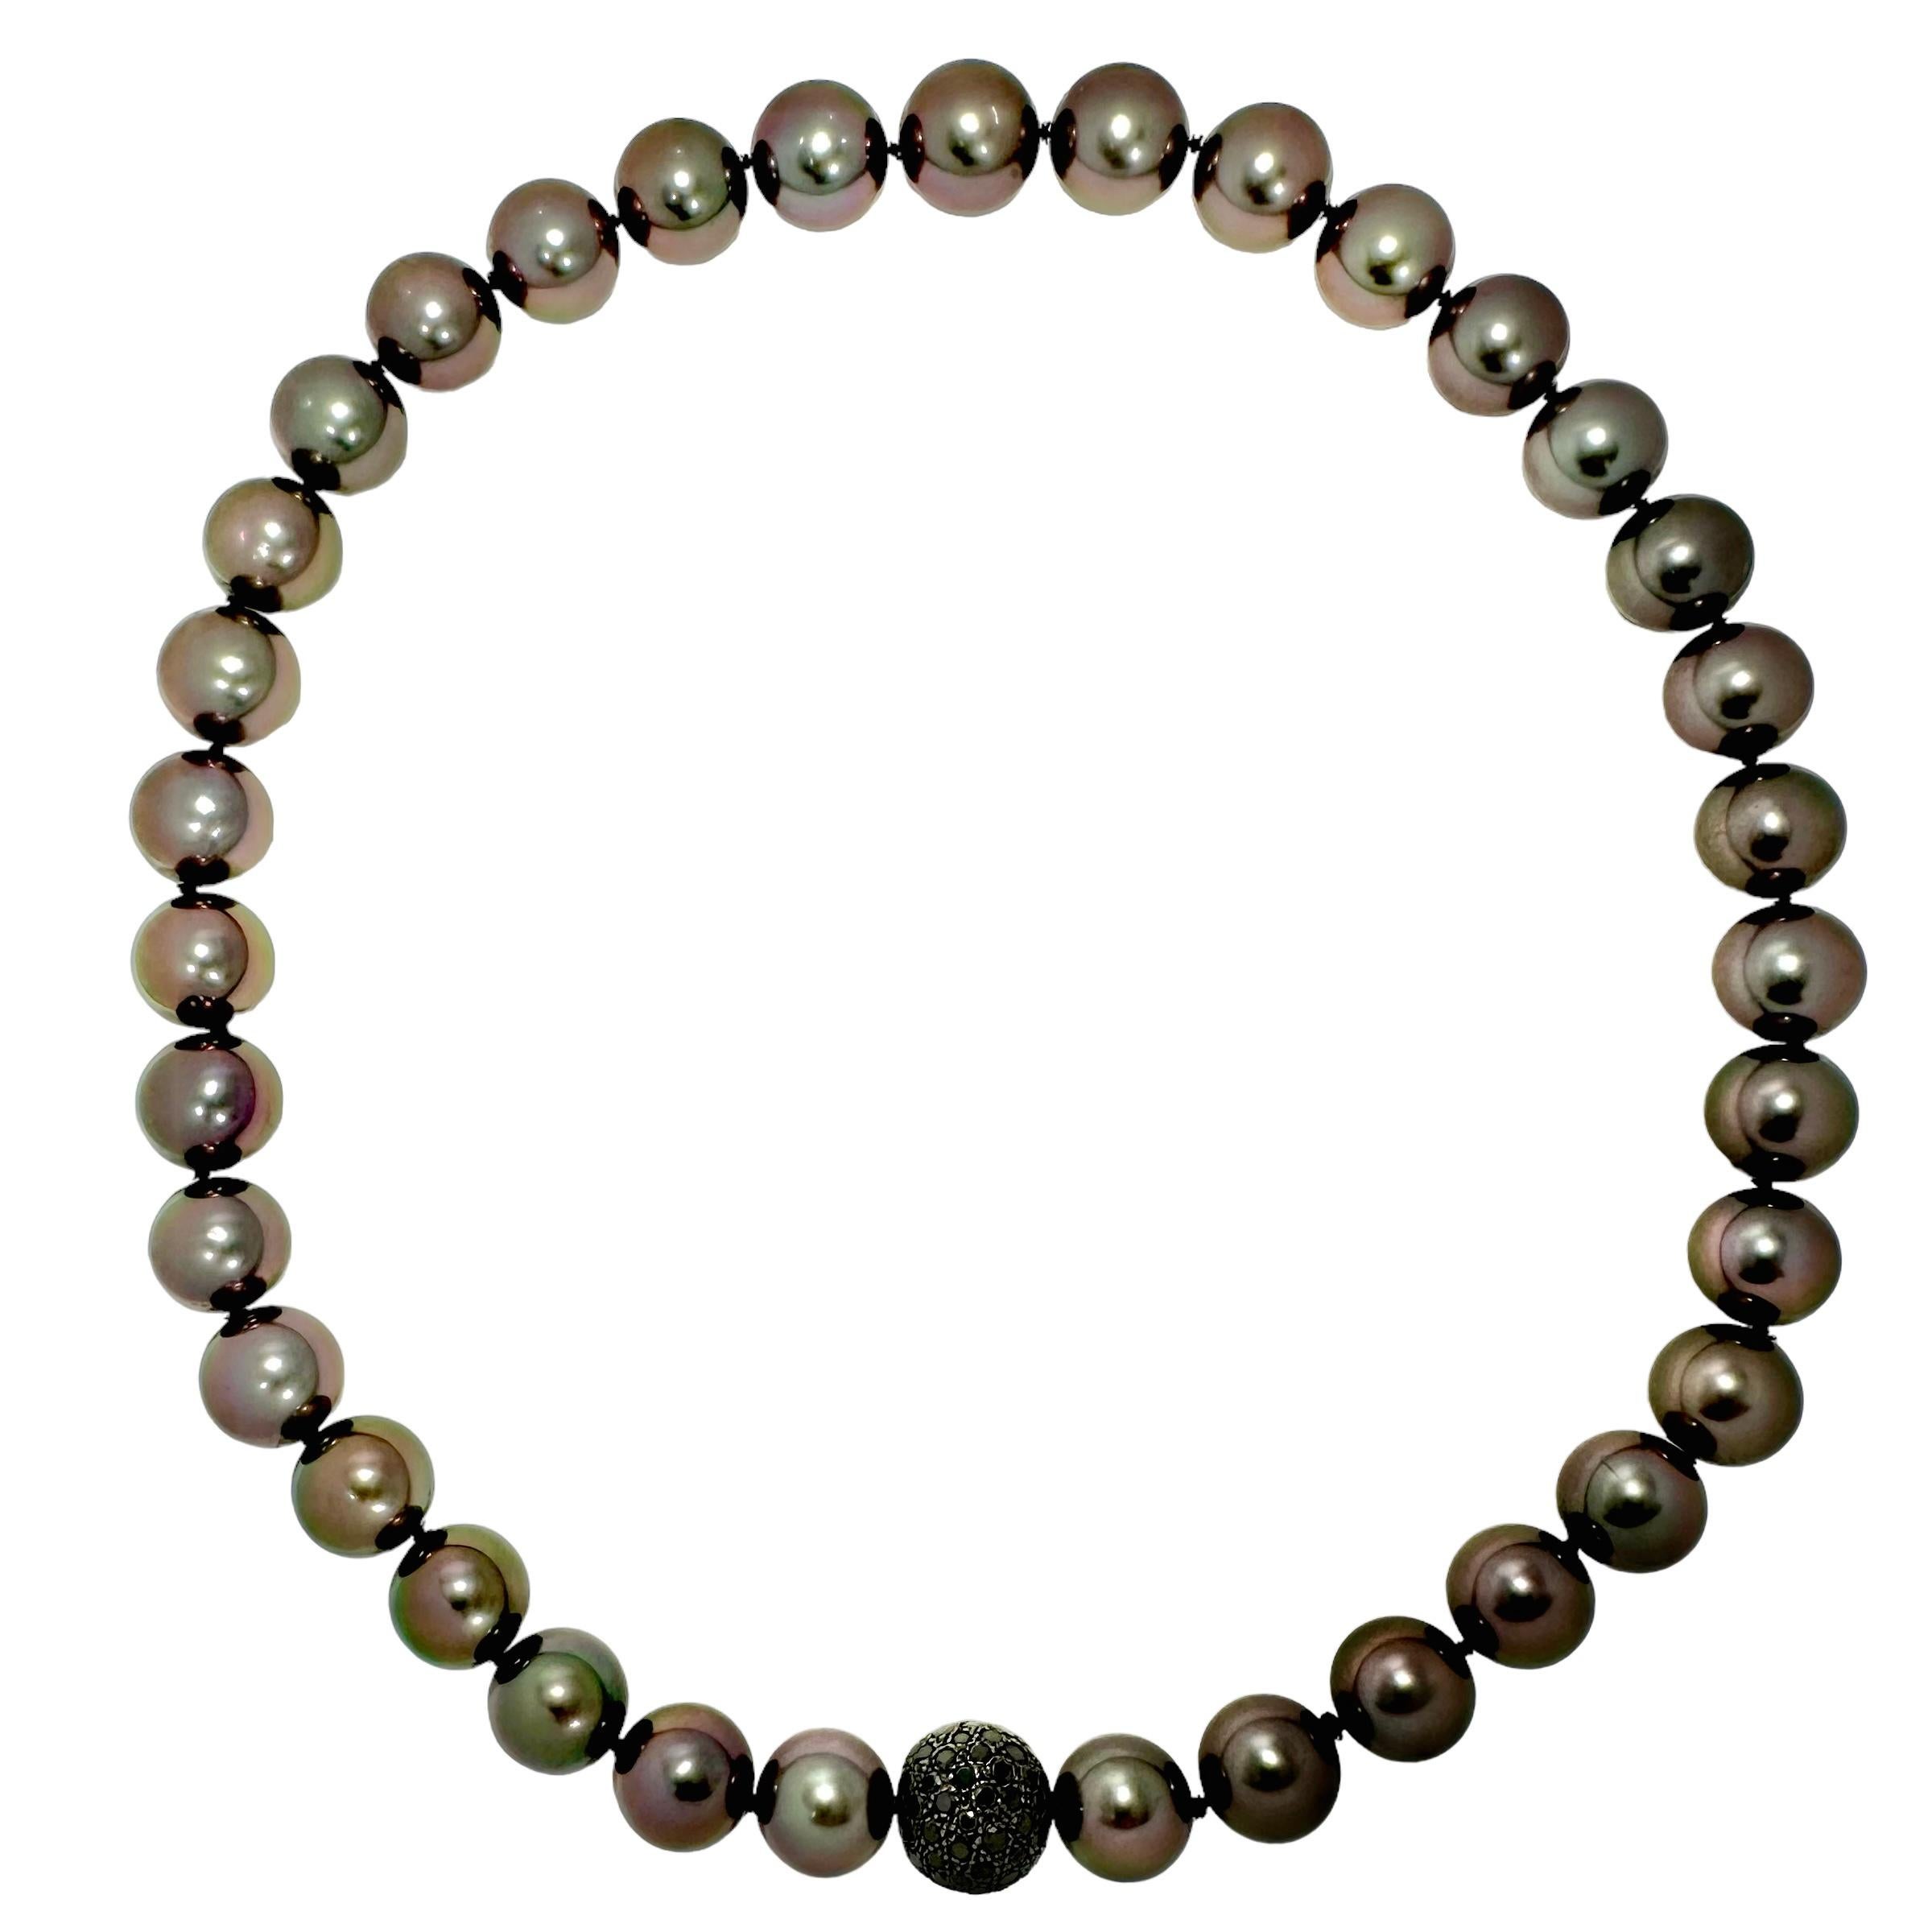 This elegant 19 1/2 inch long necklace comprised of thirty five Dark Grey Tahitian cultured pearls terminates in a 14mm black oxidized 14K gold inline ball clasp, heavily set with black diamonds. Pearls range in size from 12.06mm to 14.17mm